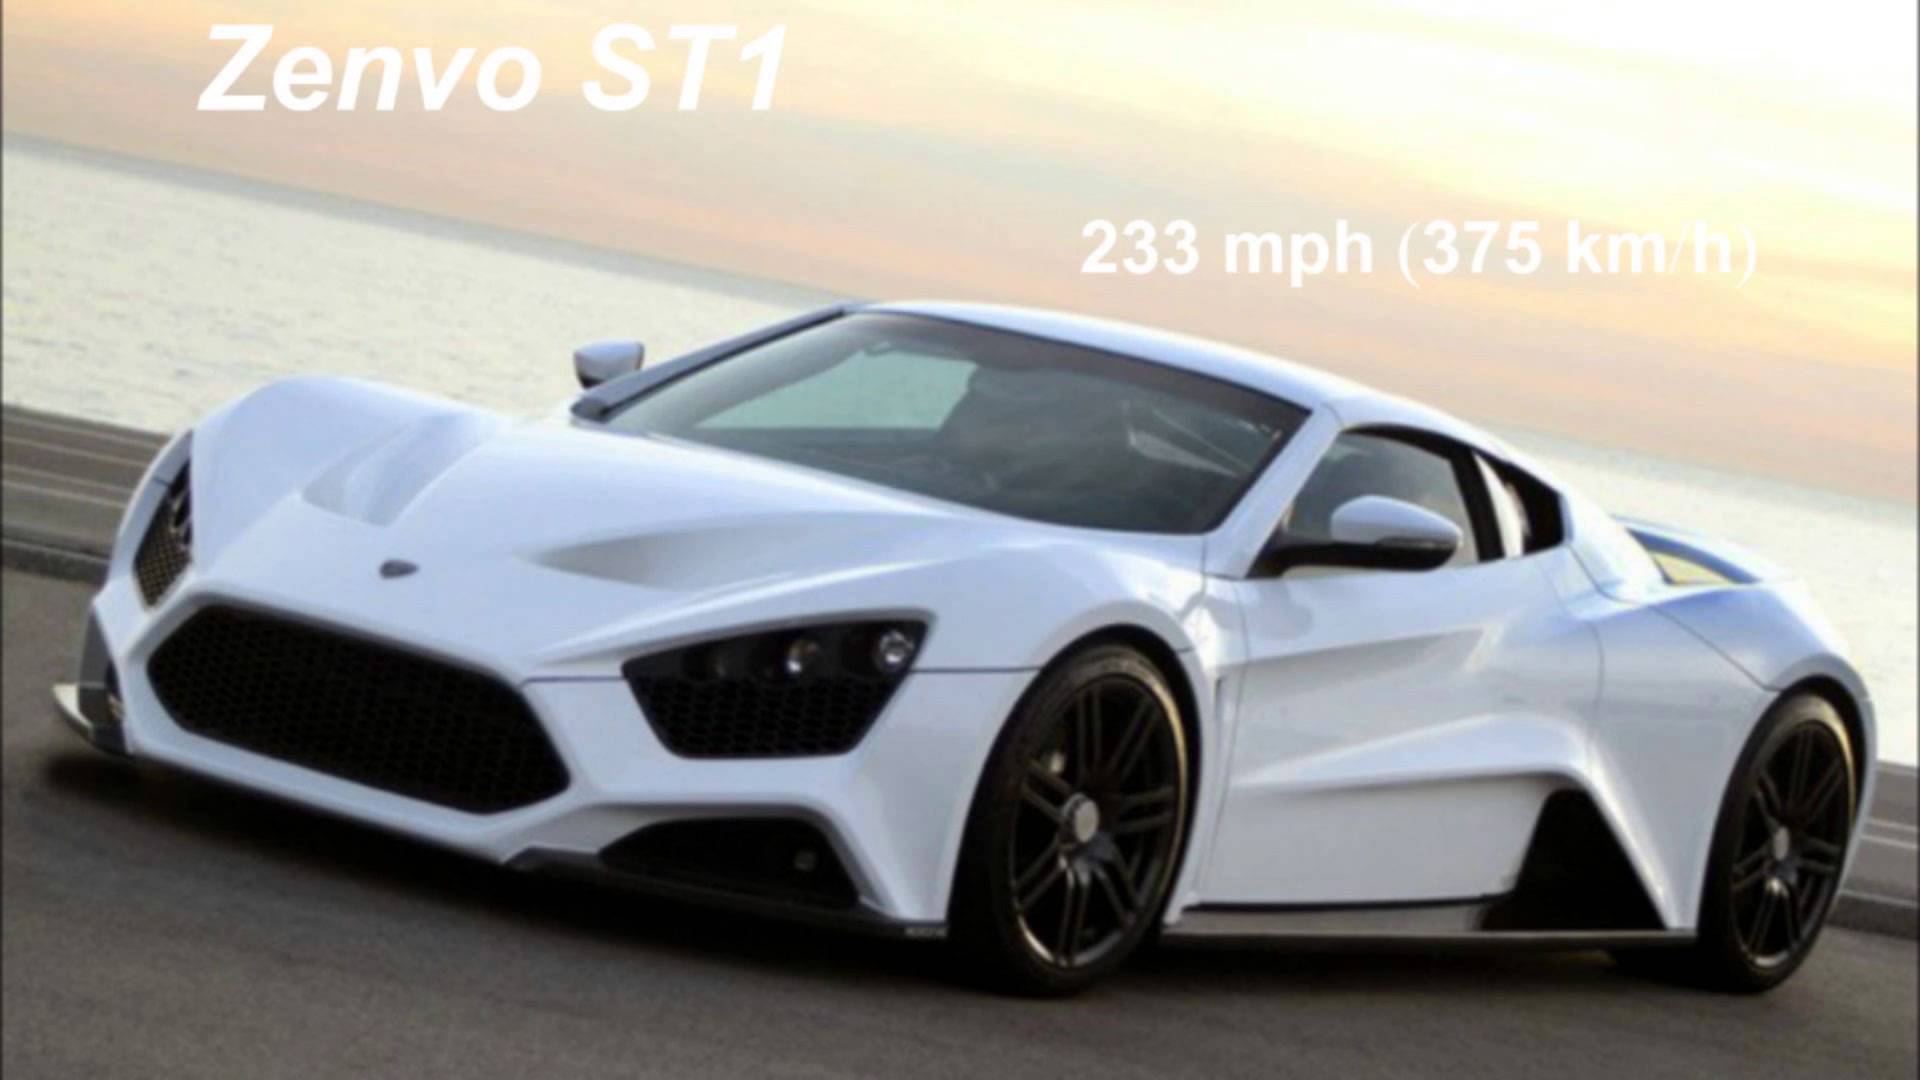 438 Top Fastest and coolest cars in the world 2015 wallpaper 